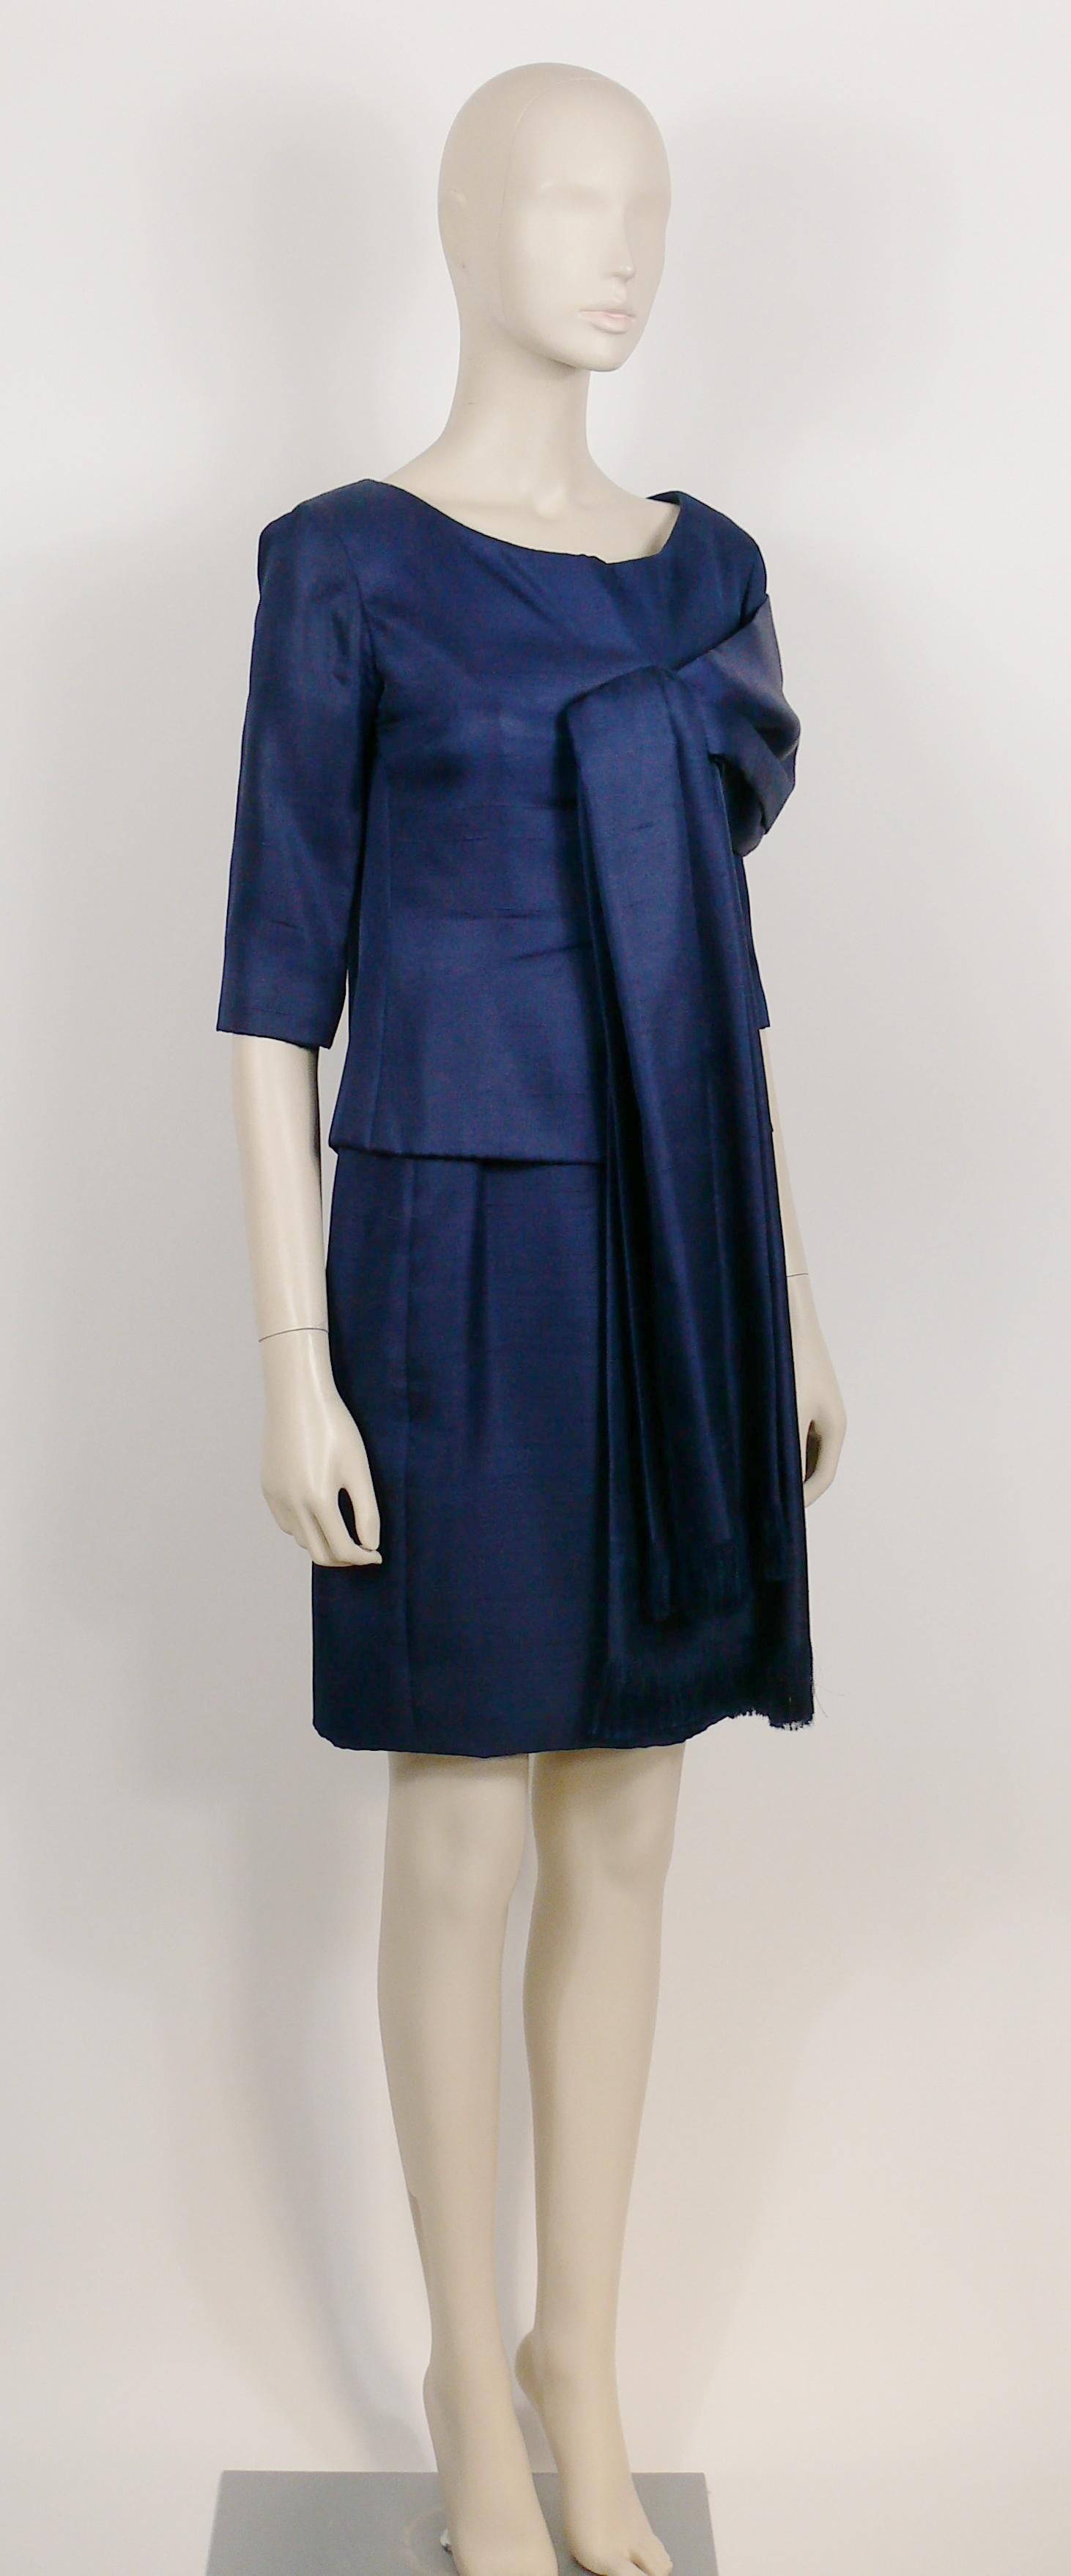 CHRISTIAN DIOR by YVES SAINT LAURENT Spring-Summer 1959 Haute-Couture faux two-piece blue cocktail dress.

This dress features :
- Faux two-piece design.
- 3/4-length sleeves.
- Attached half front and drape over one shoulder scarf (snap button on